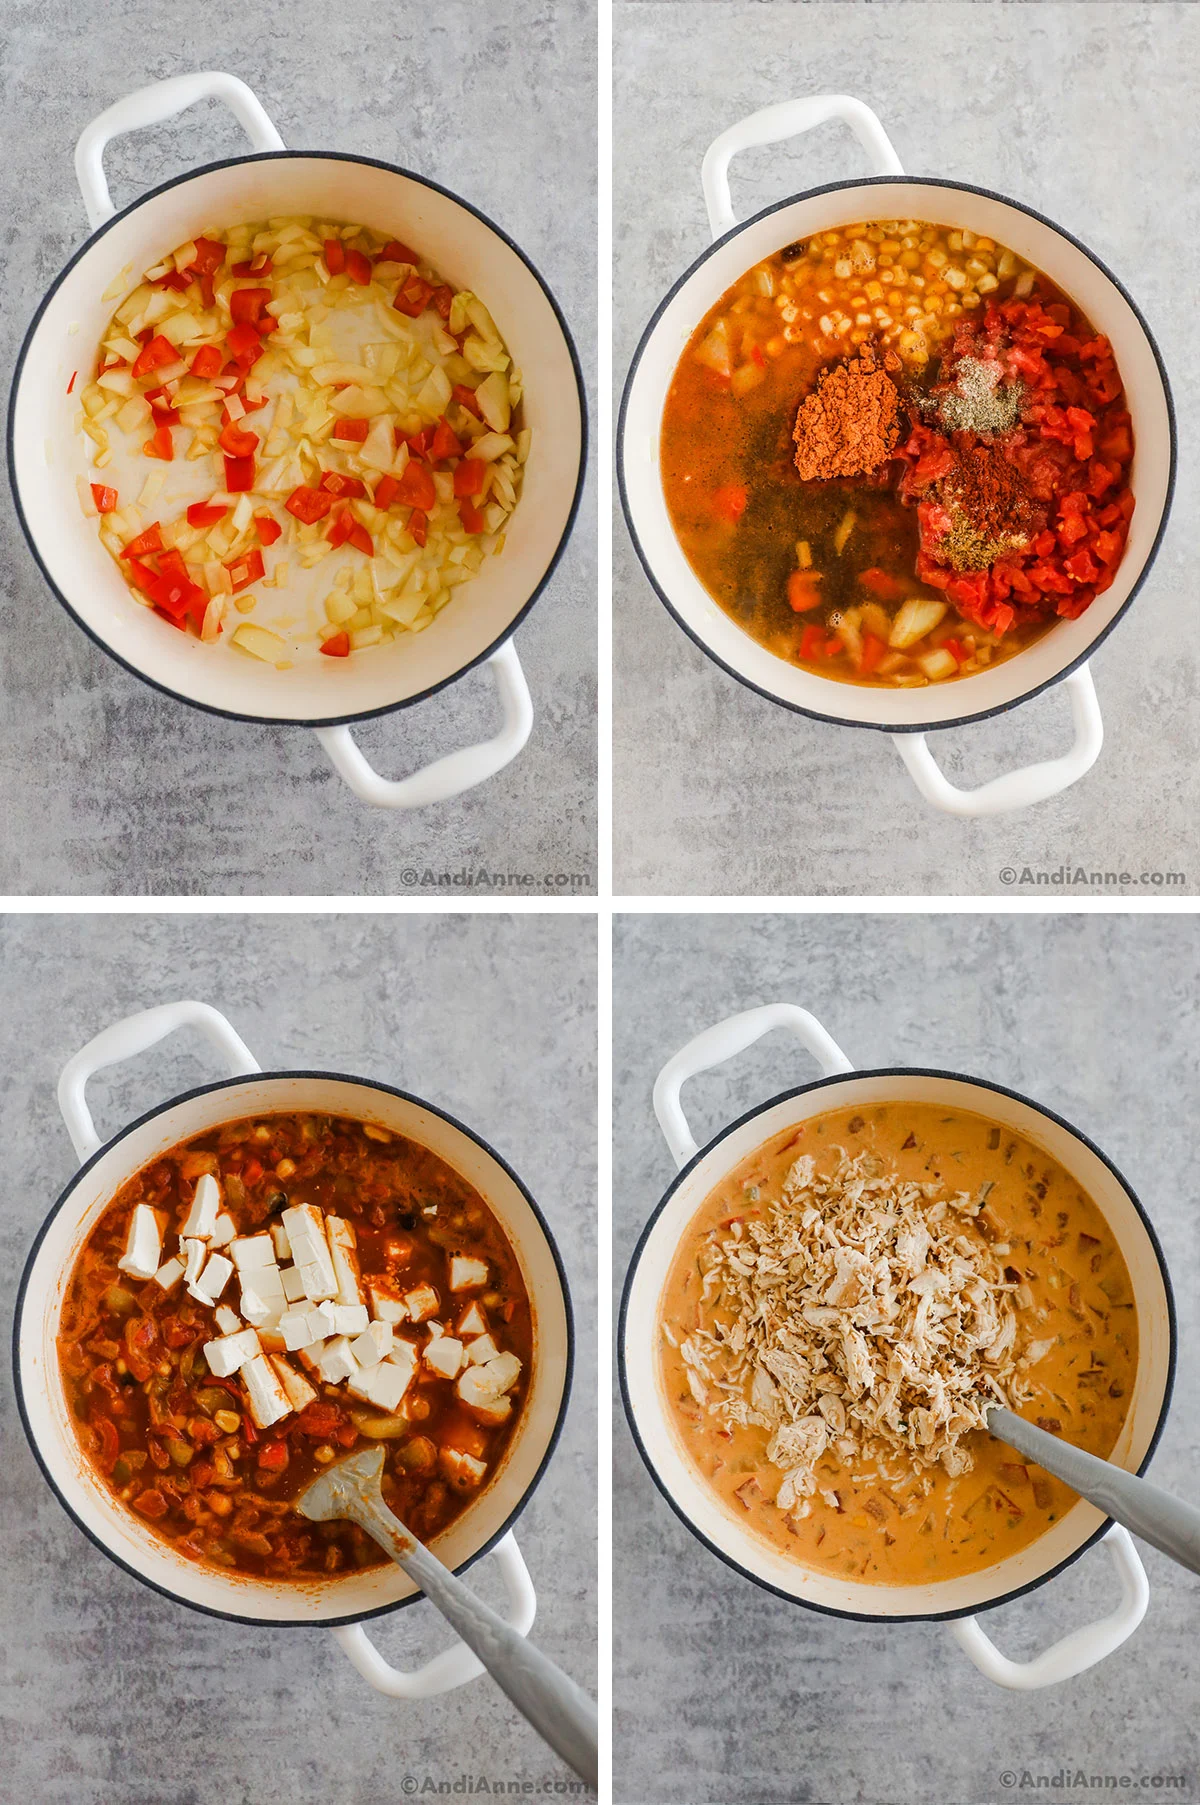 Four images showing steps to make recipe. First is chopped onion and bell pepper in a white soup pot. Second is spices, corn, tomatoes and broth dumped in the same pot. Third is cubed cream cheese added. Fourth is shredded cooked chicken added.